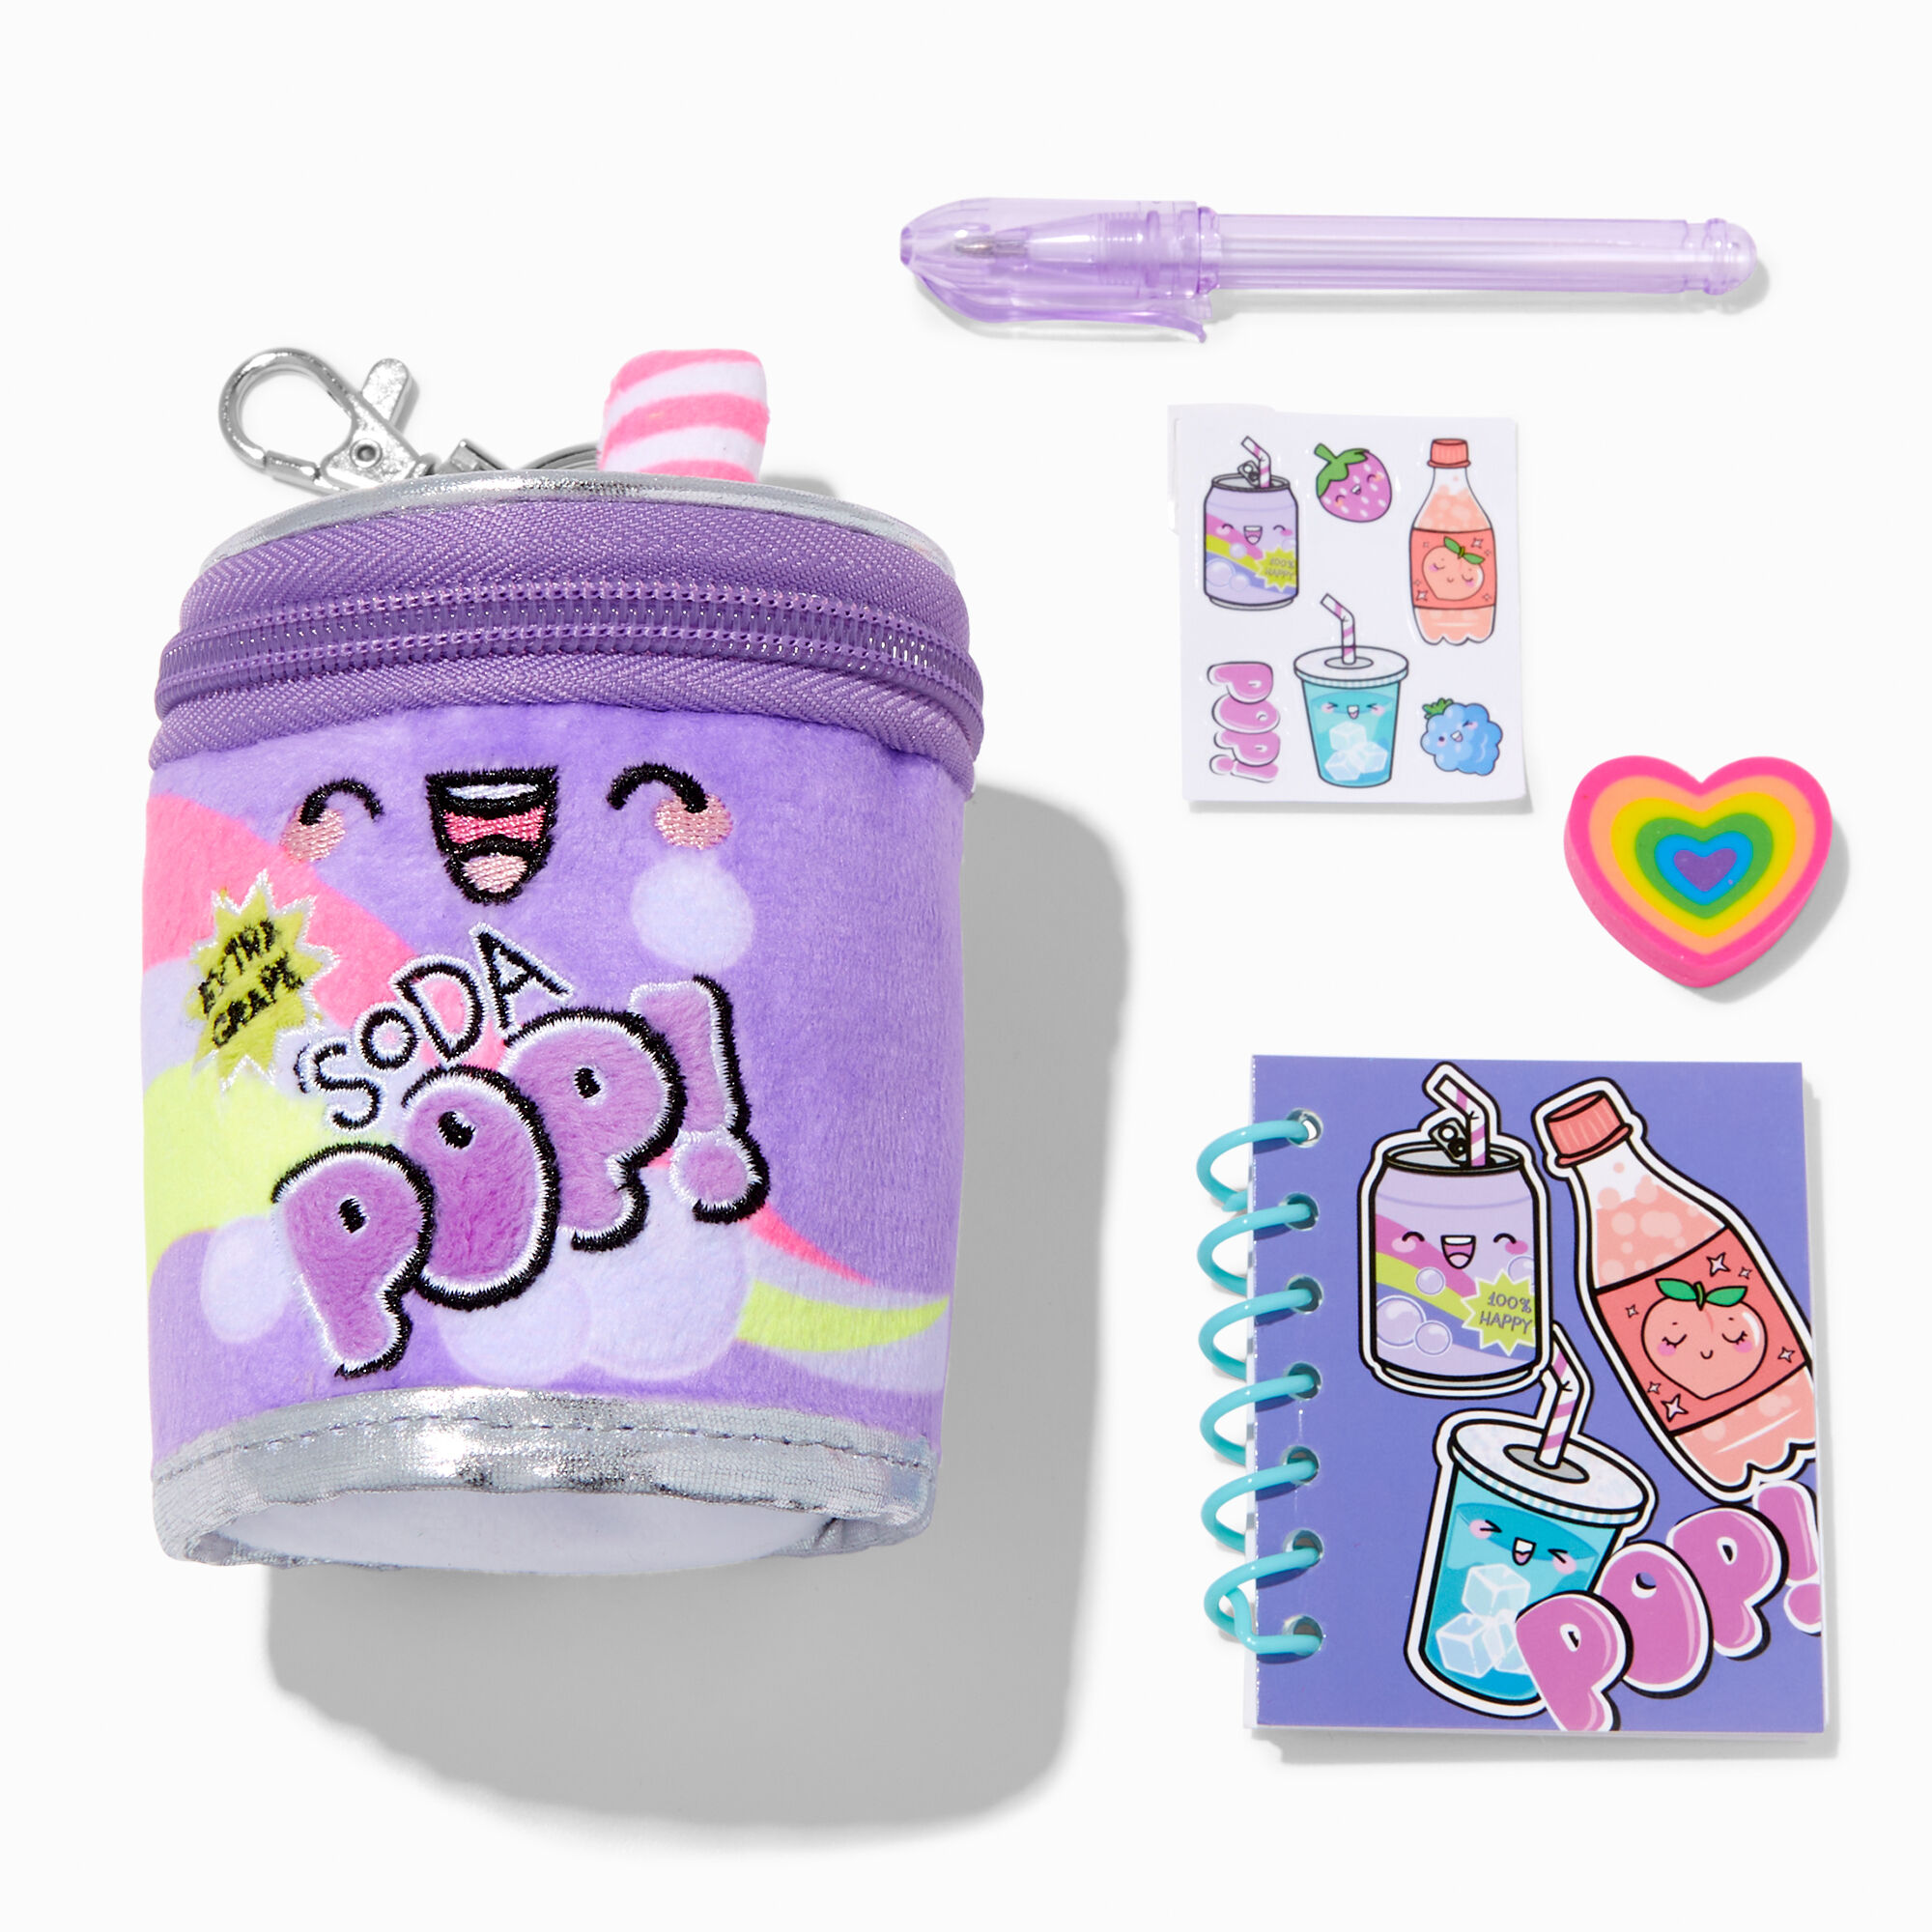 View Claires Soda Pop 4 Stationery Set information